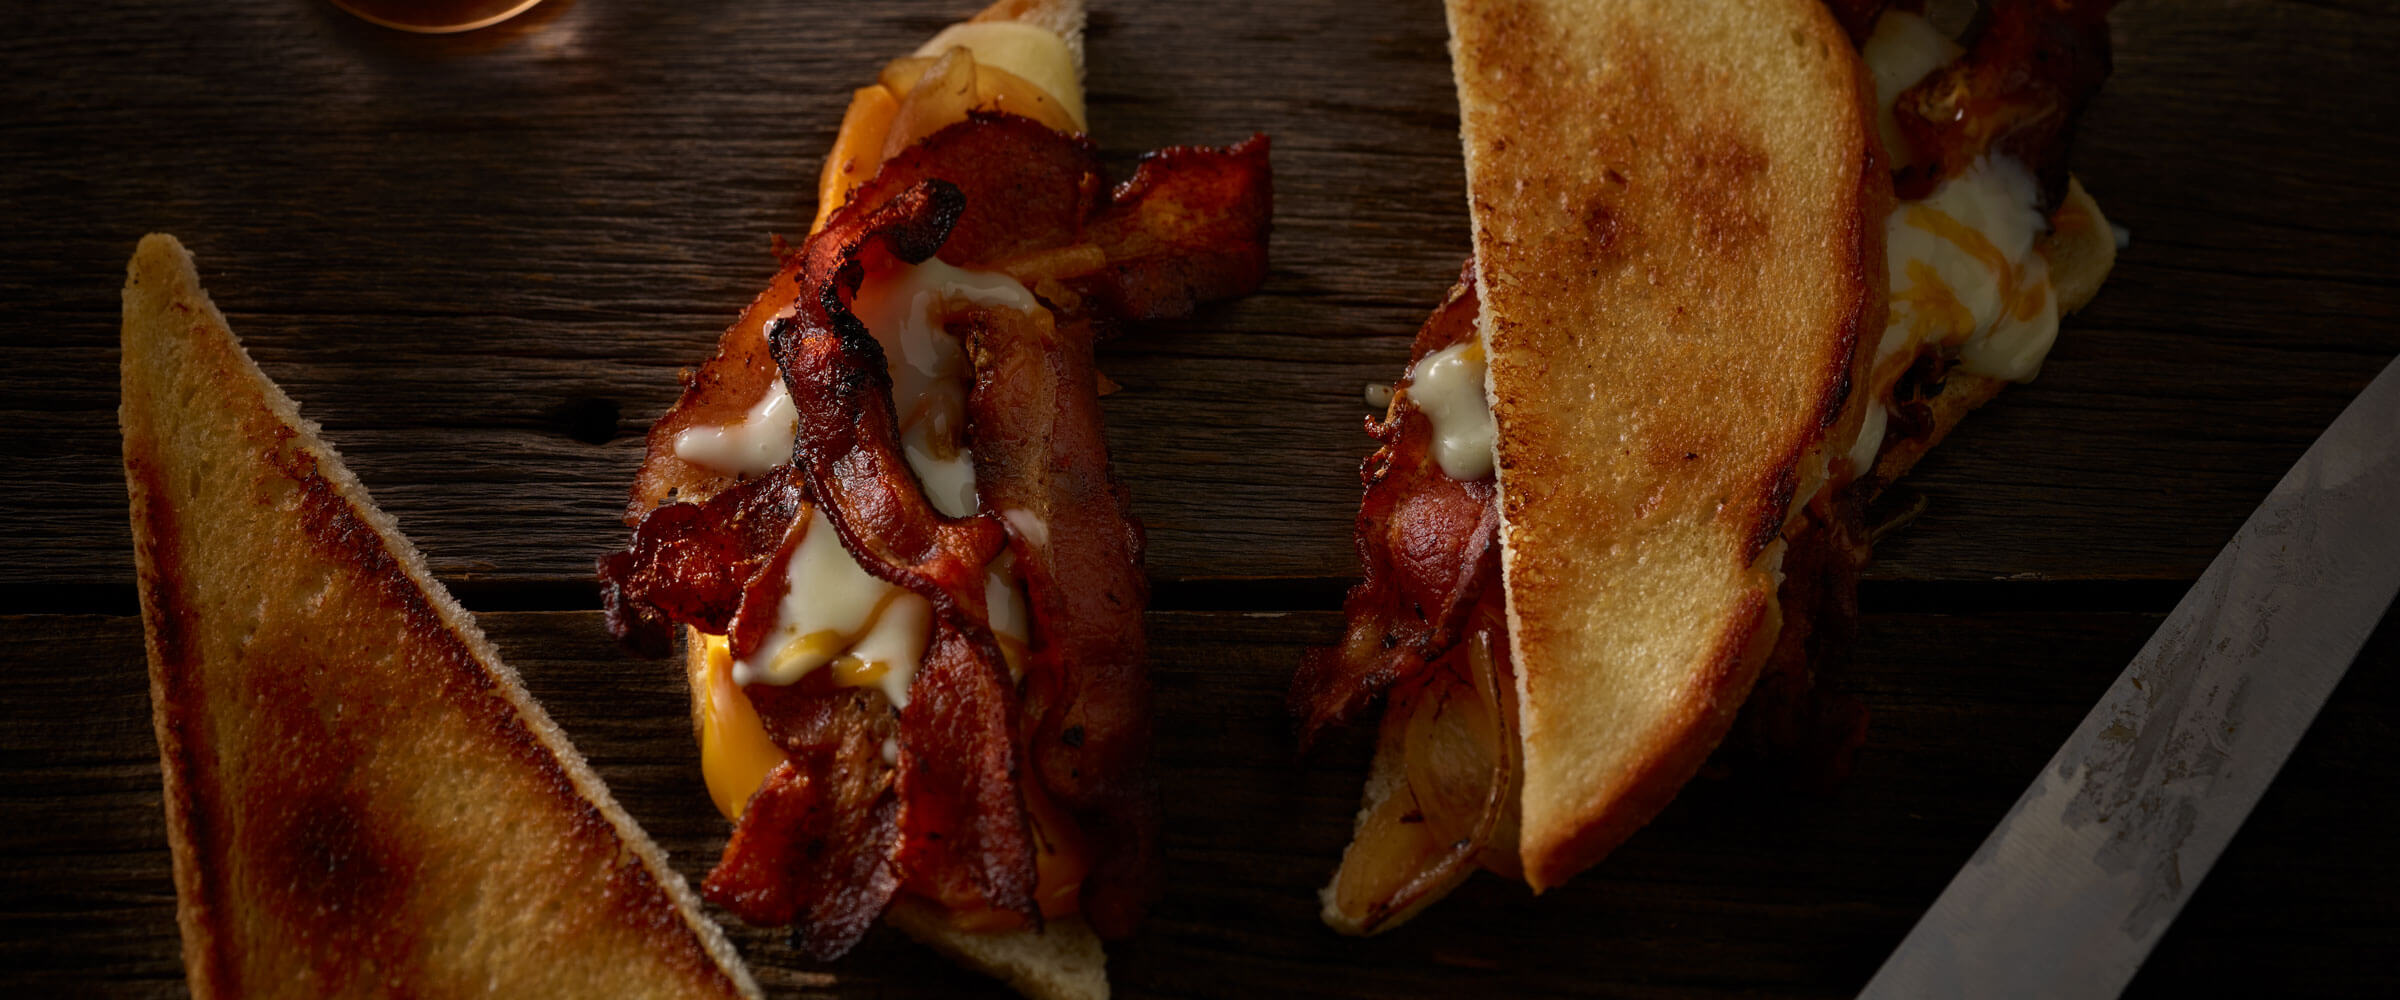 Bacon curd grilled cheese sandwich on wood table